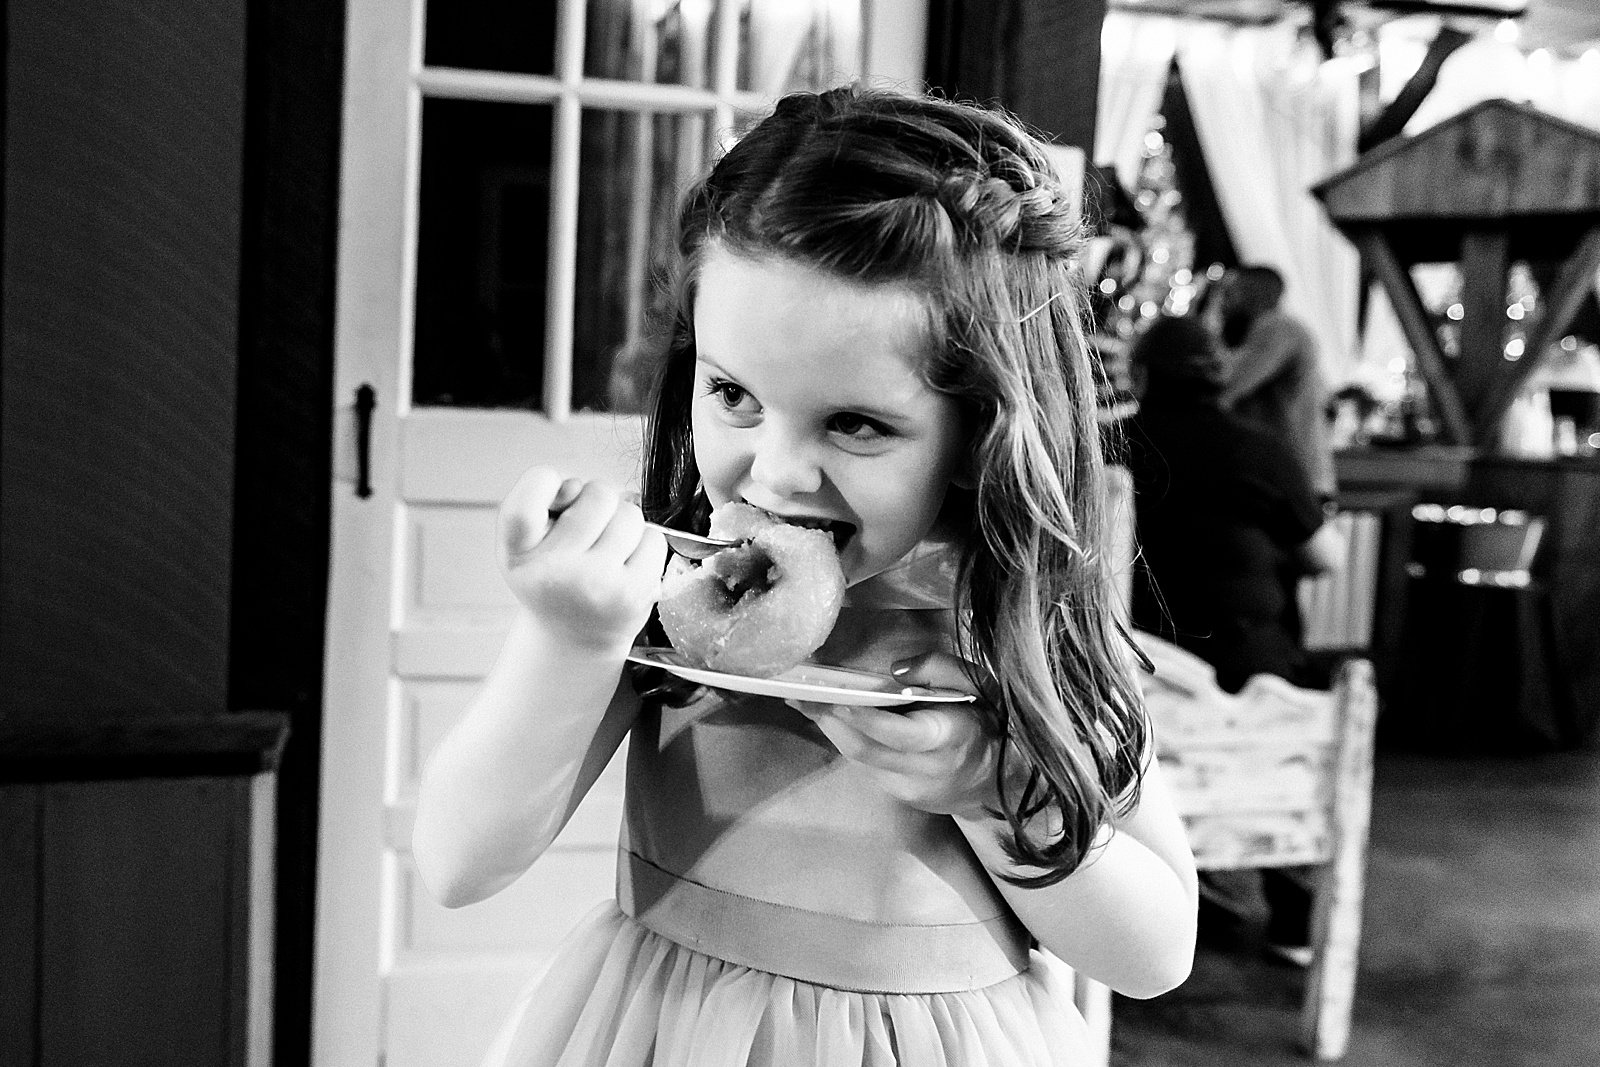 flower girl chows down on a donut from the wedding dessert table